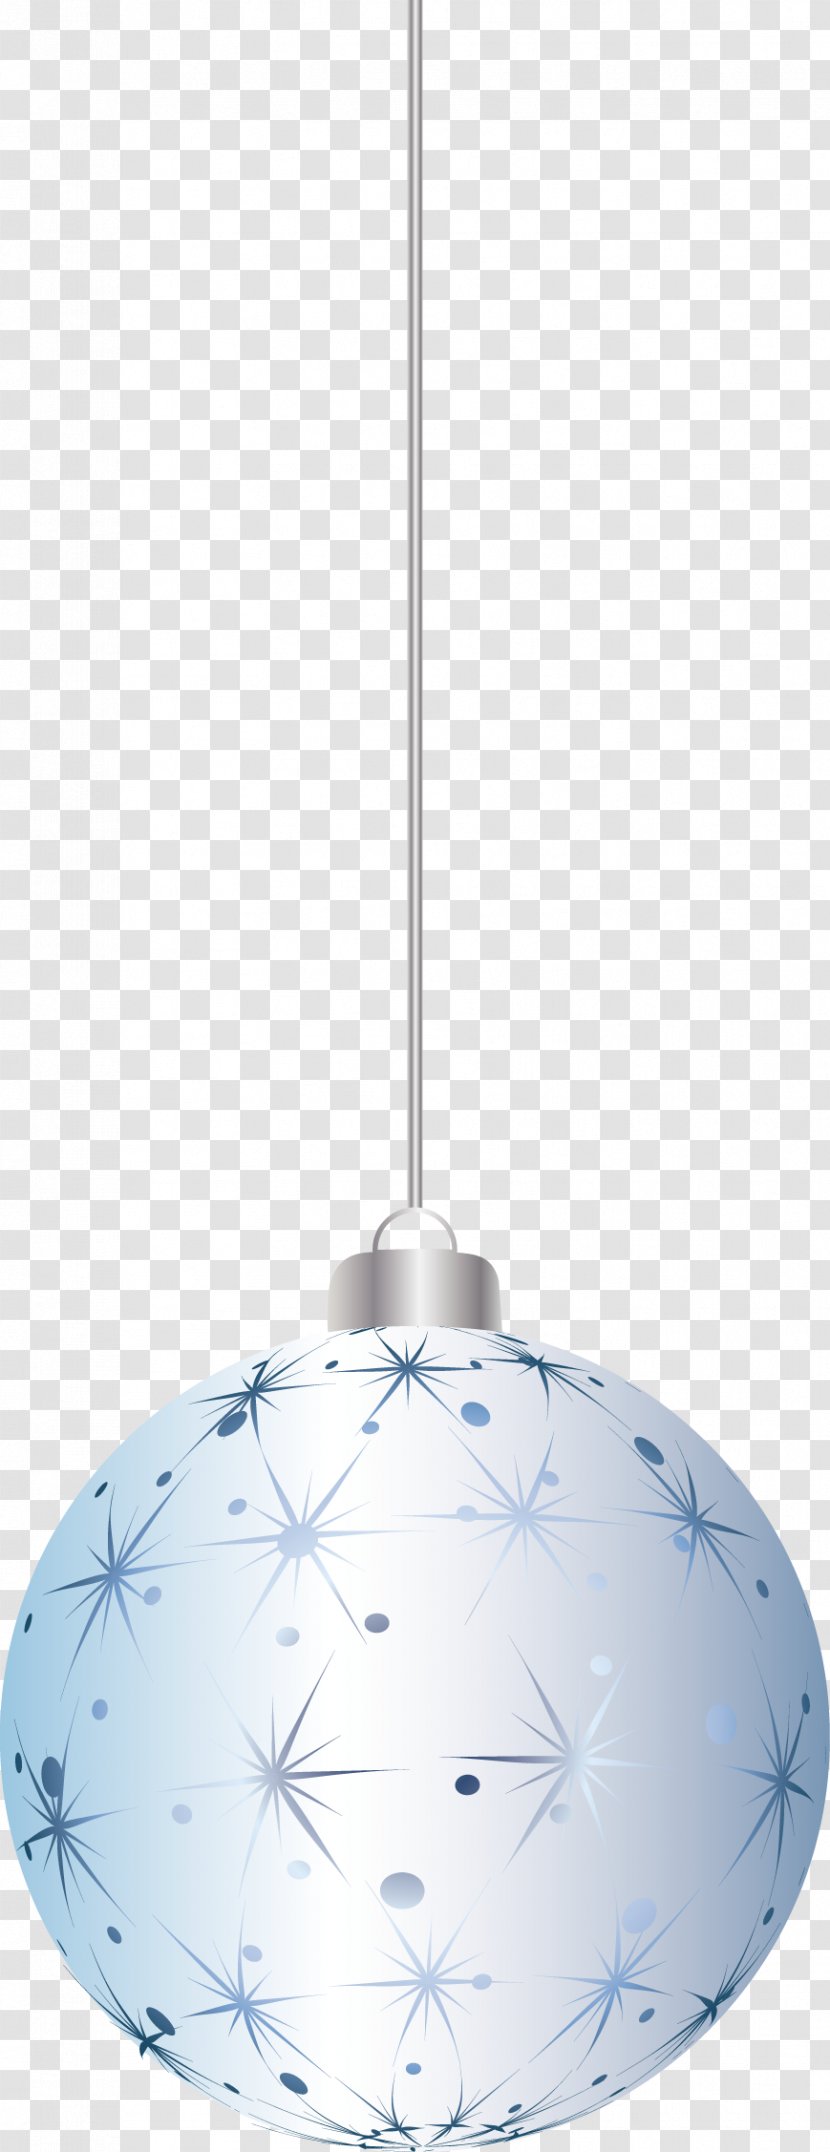 Christmas Ornament New Year The Elder Scrolls V: Skyrim Bubble Shooter Balls - Photography Transparent PNG